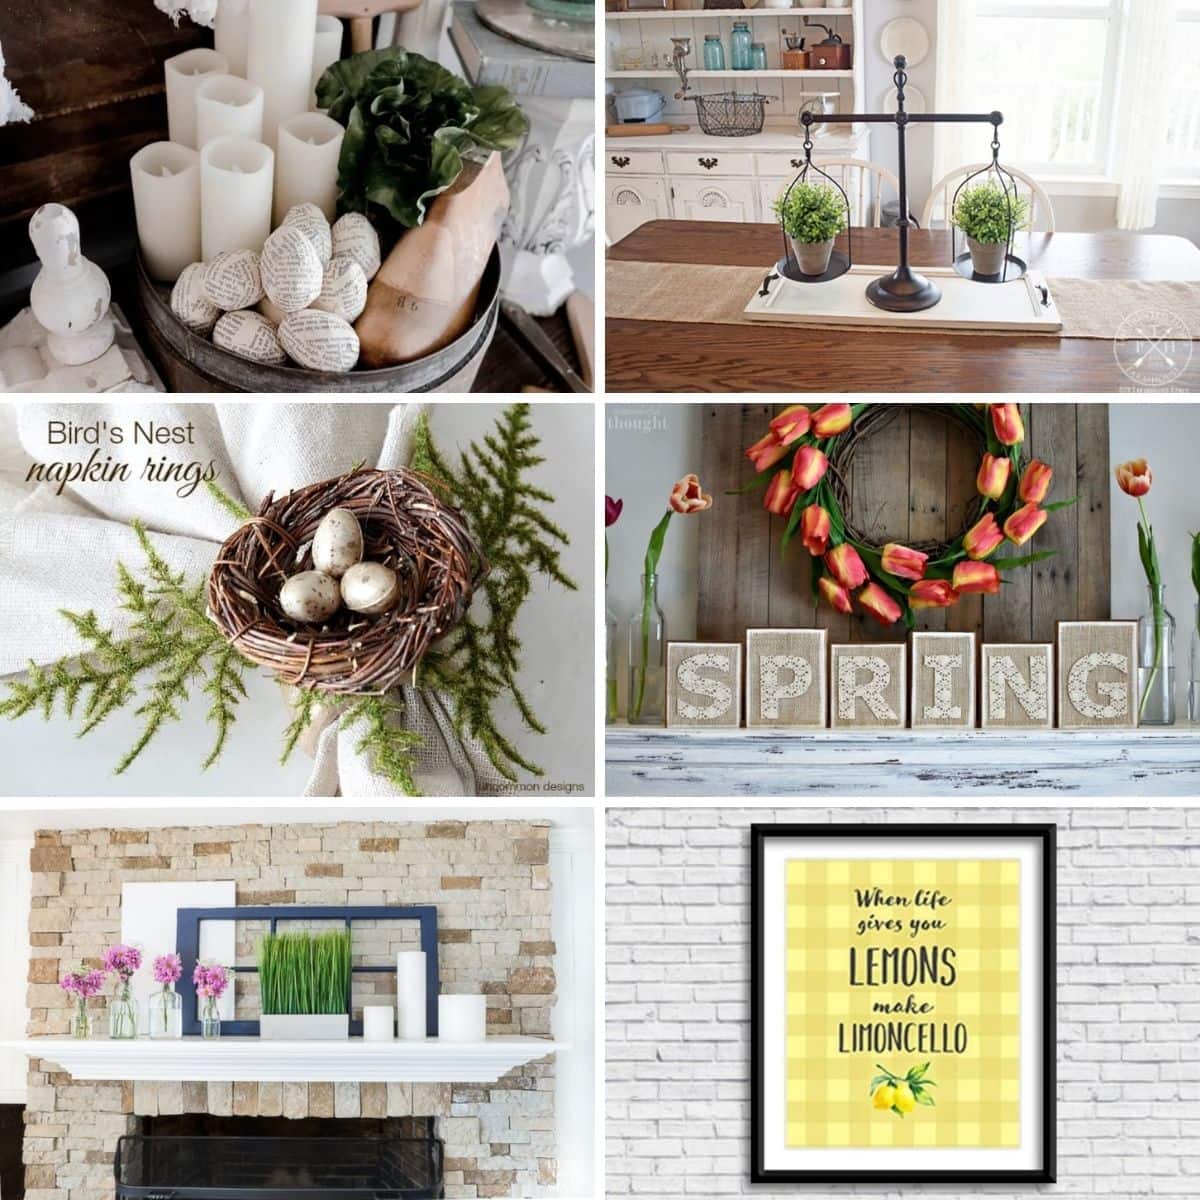 Image features 6 spring decor ideas: a bowl of eggs wrapped in old book pages, a wooden tray with old fashioned scales holding plant pots on top, a napkin ring decorated with a bird's nest, block wooden letters that spell out "Spring", a decorated mantel with vases on top of it and a yellow picture that says "When life gives you lemons, make limoncello" in black letters